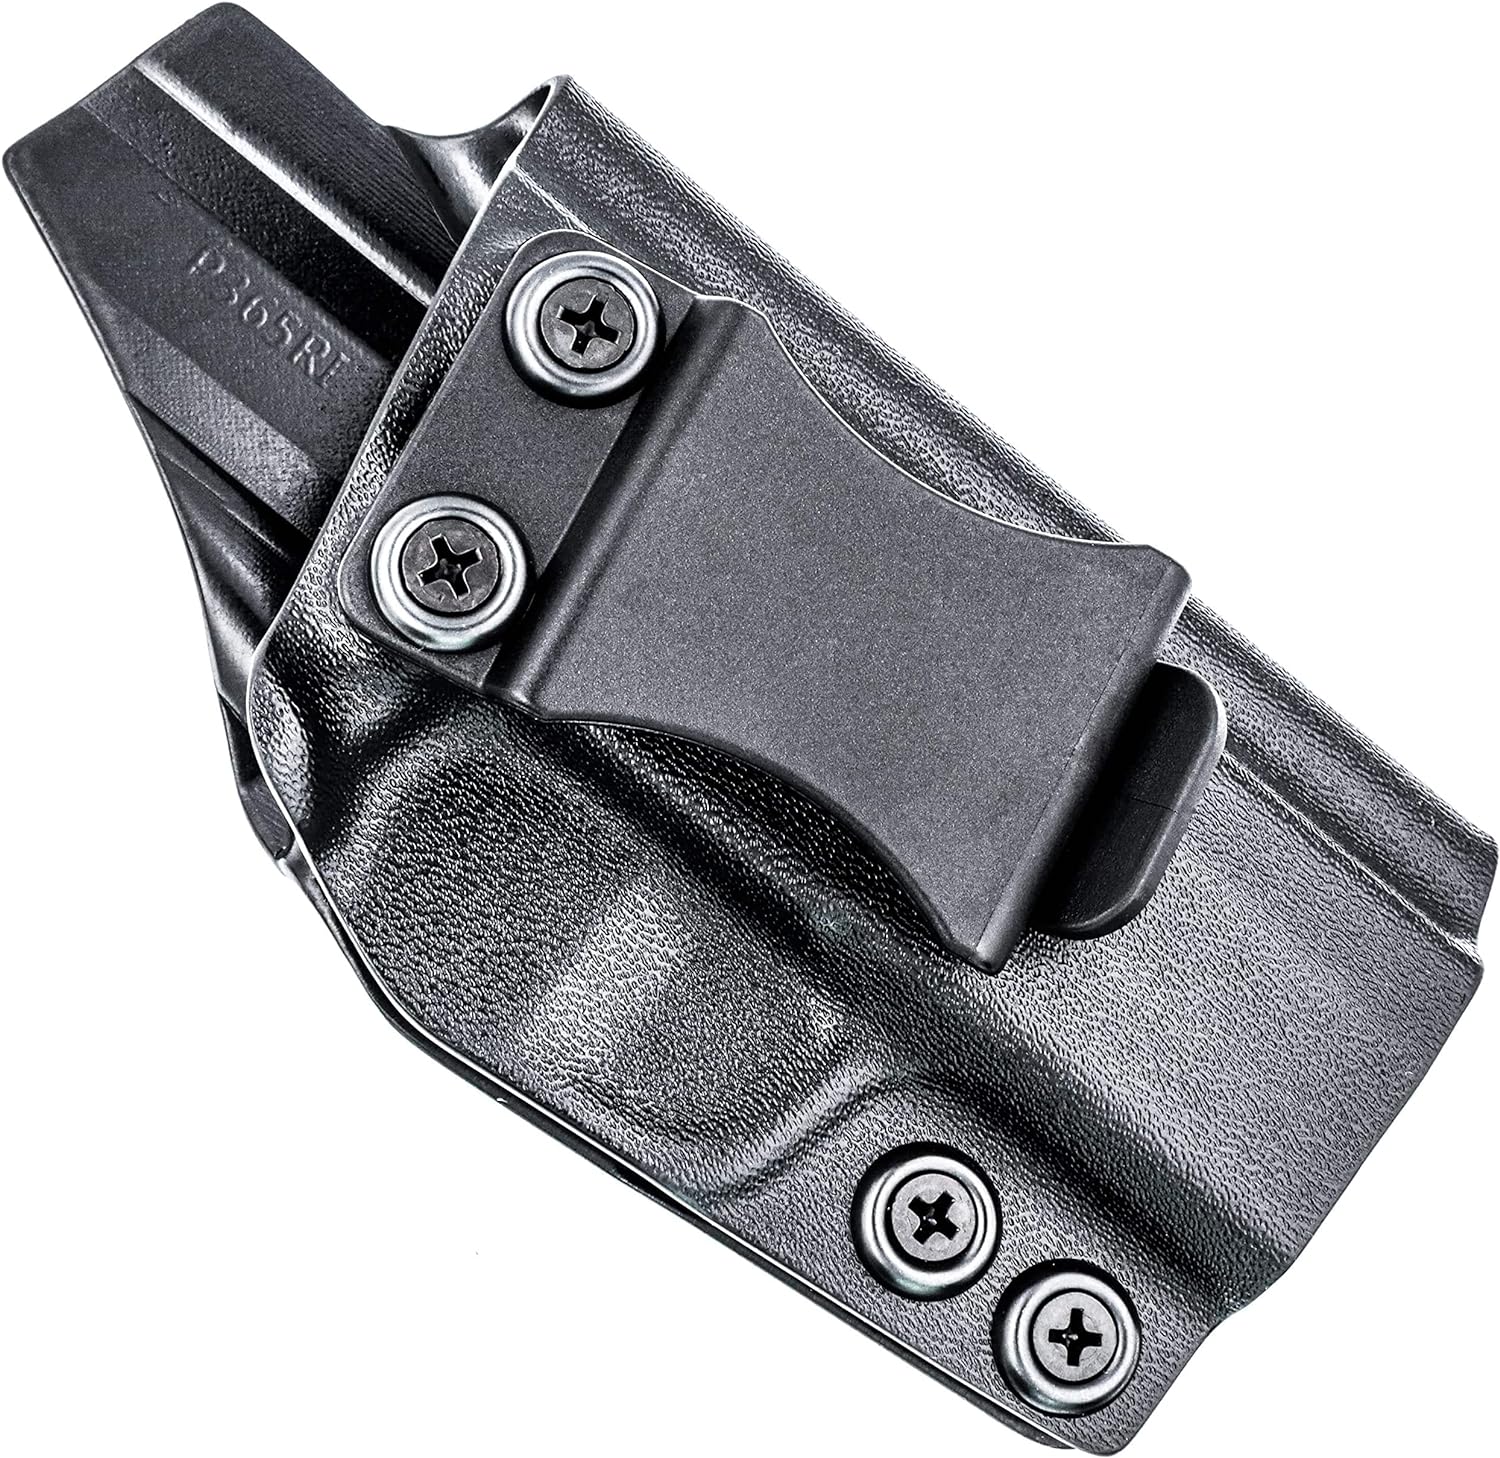 Rounded IWB KYDEX Holsters